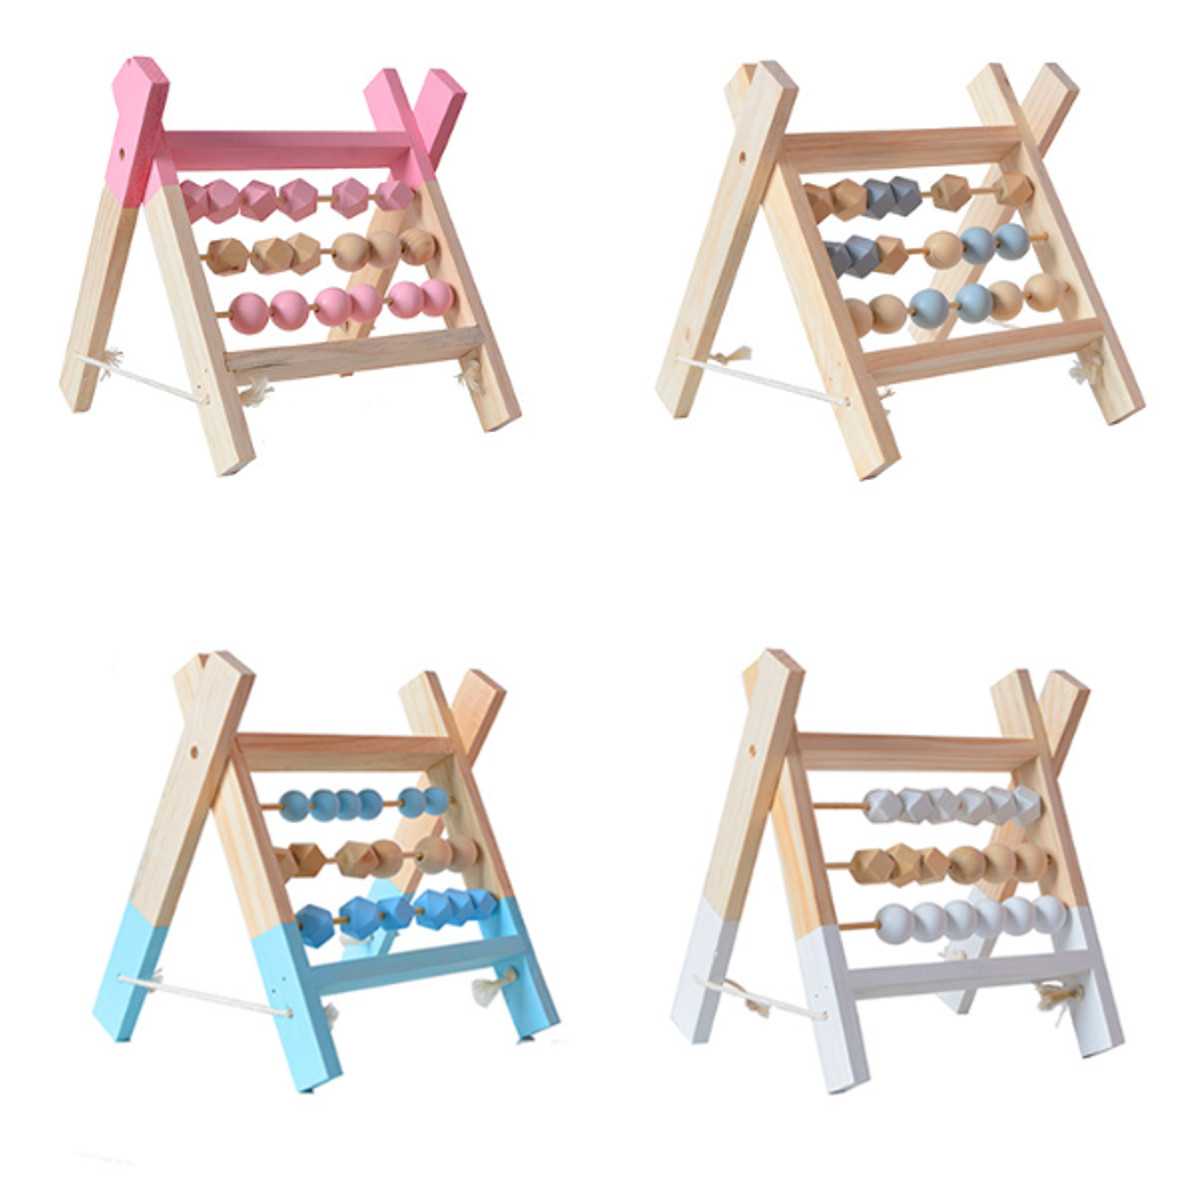 Natural-Pine-Nordic-Baby-Room-Decor-Wooden-Abacus-Educational-Nursery-Props-Toys-1581036-10